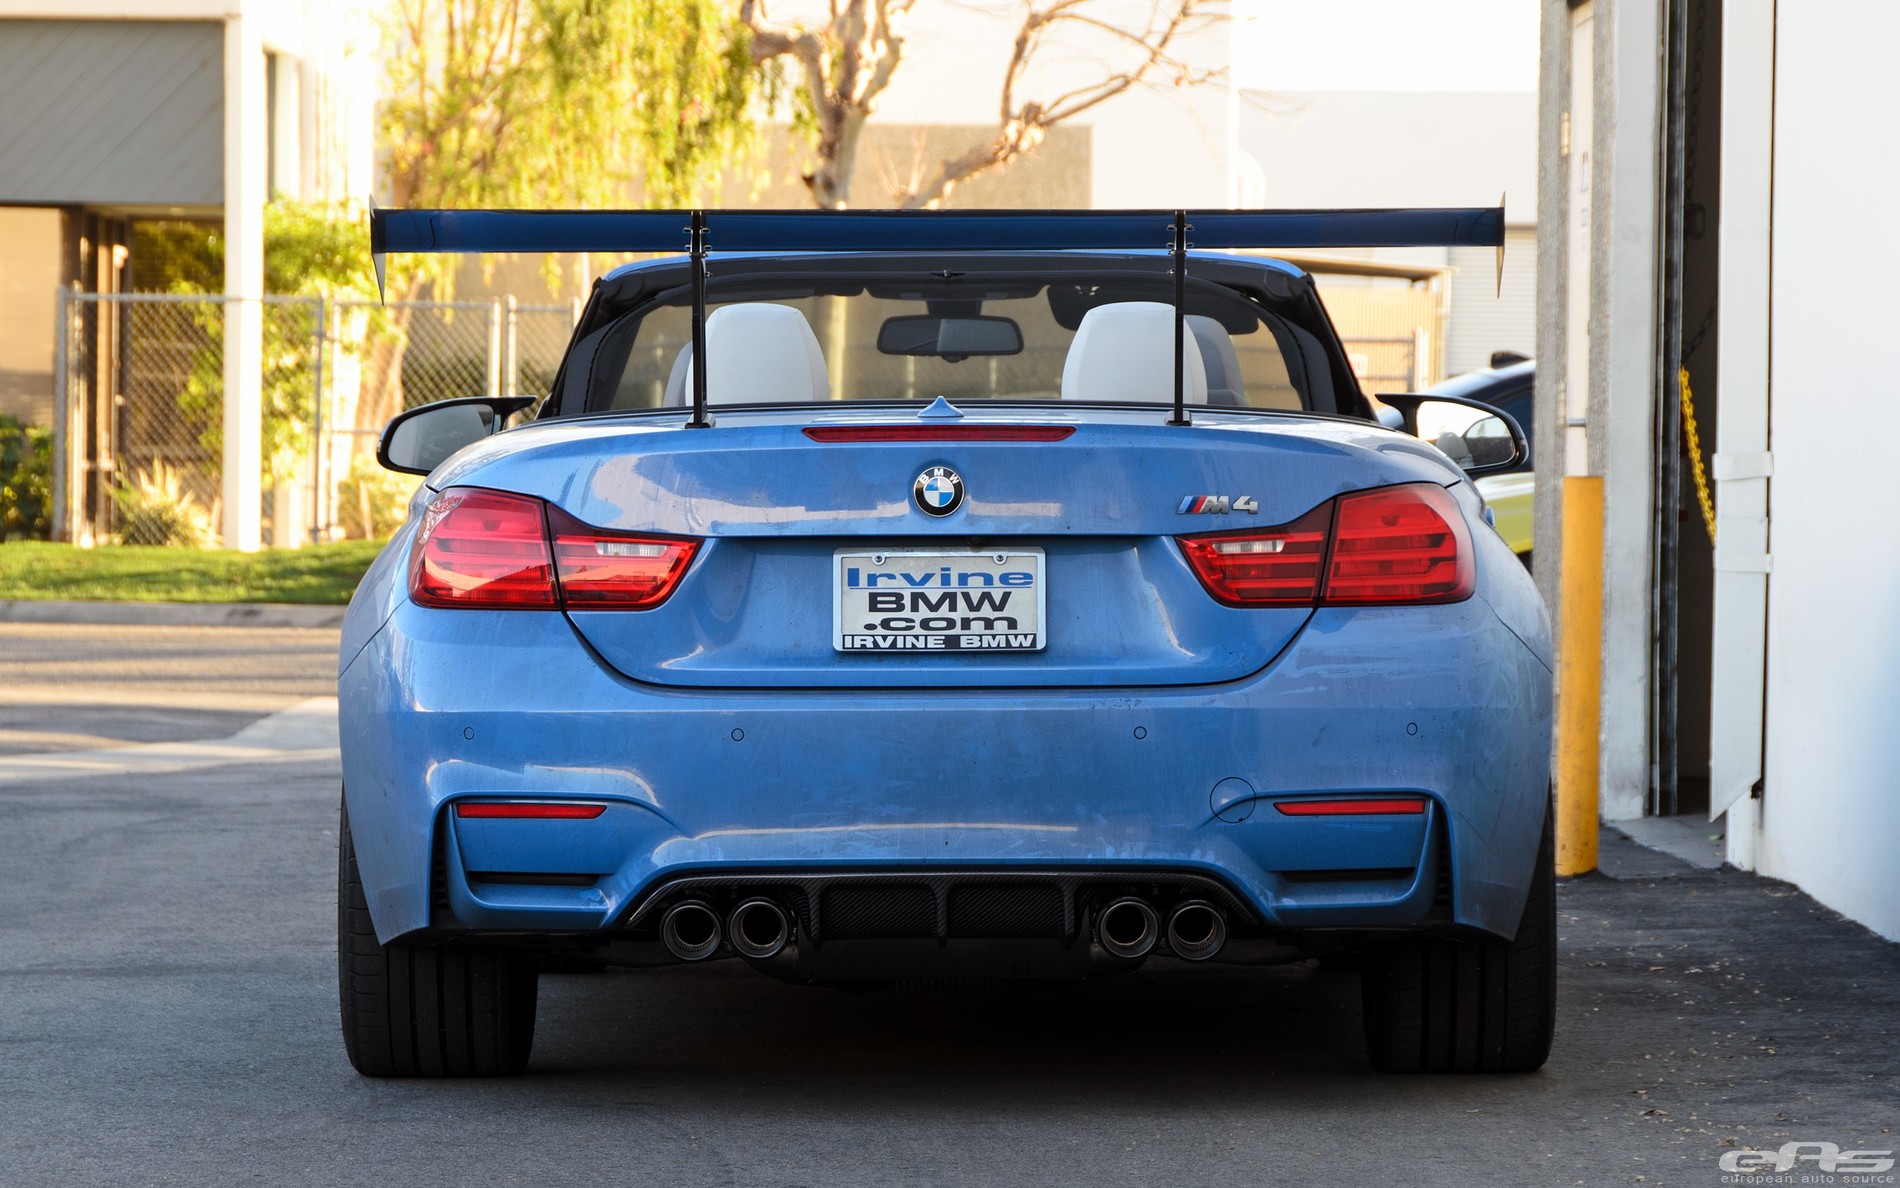 Honda Civic 10th gen Performance parts? Flashpro? Expected potential...? yas-marina-blue-bmw-m4-convertible-has-a-huge-tunk-wing-to-boast-with-photo-gallery_2